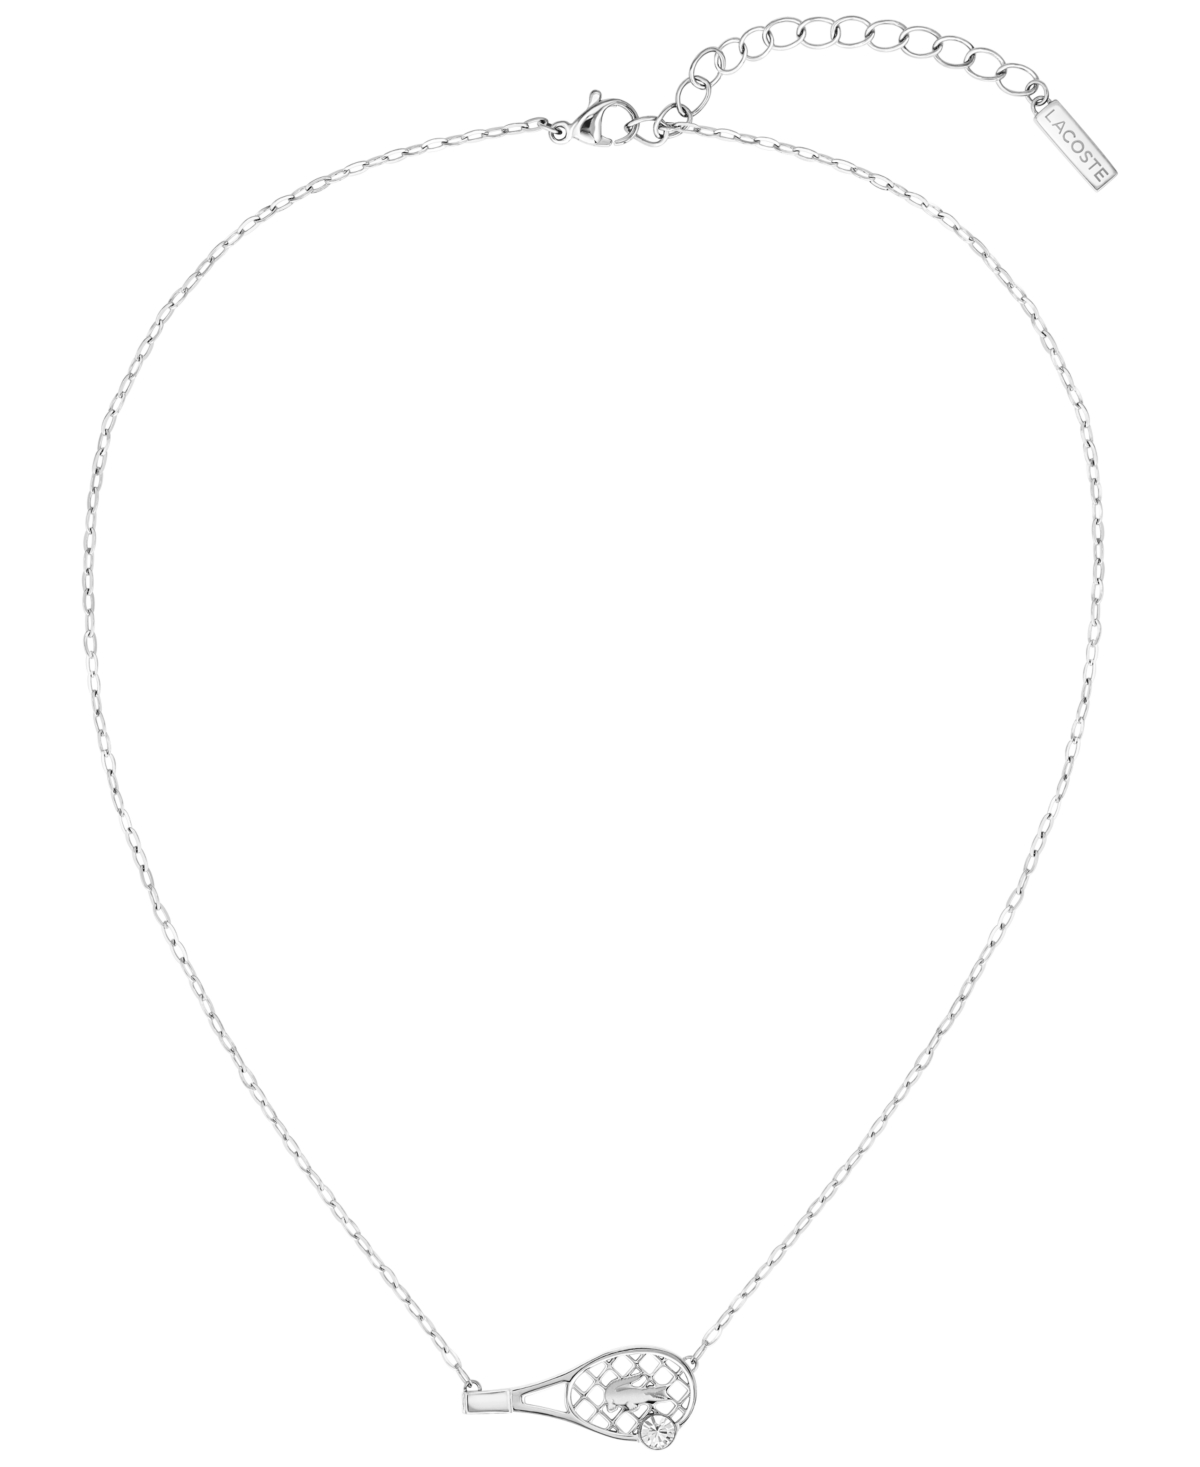 Lacoste Stainless Steel Tennis Racket Necklace In Silver